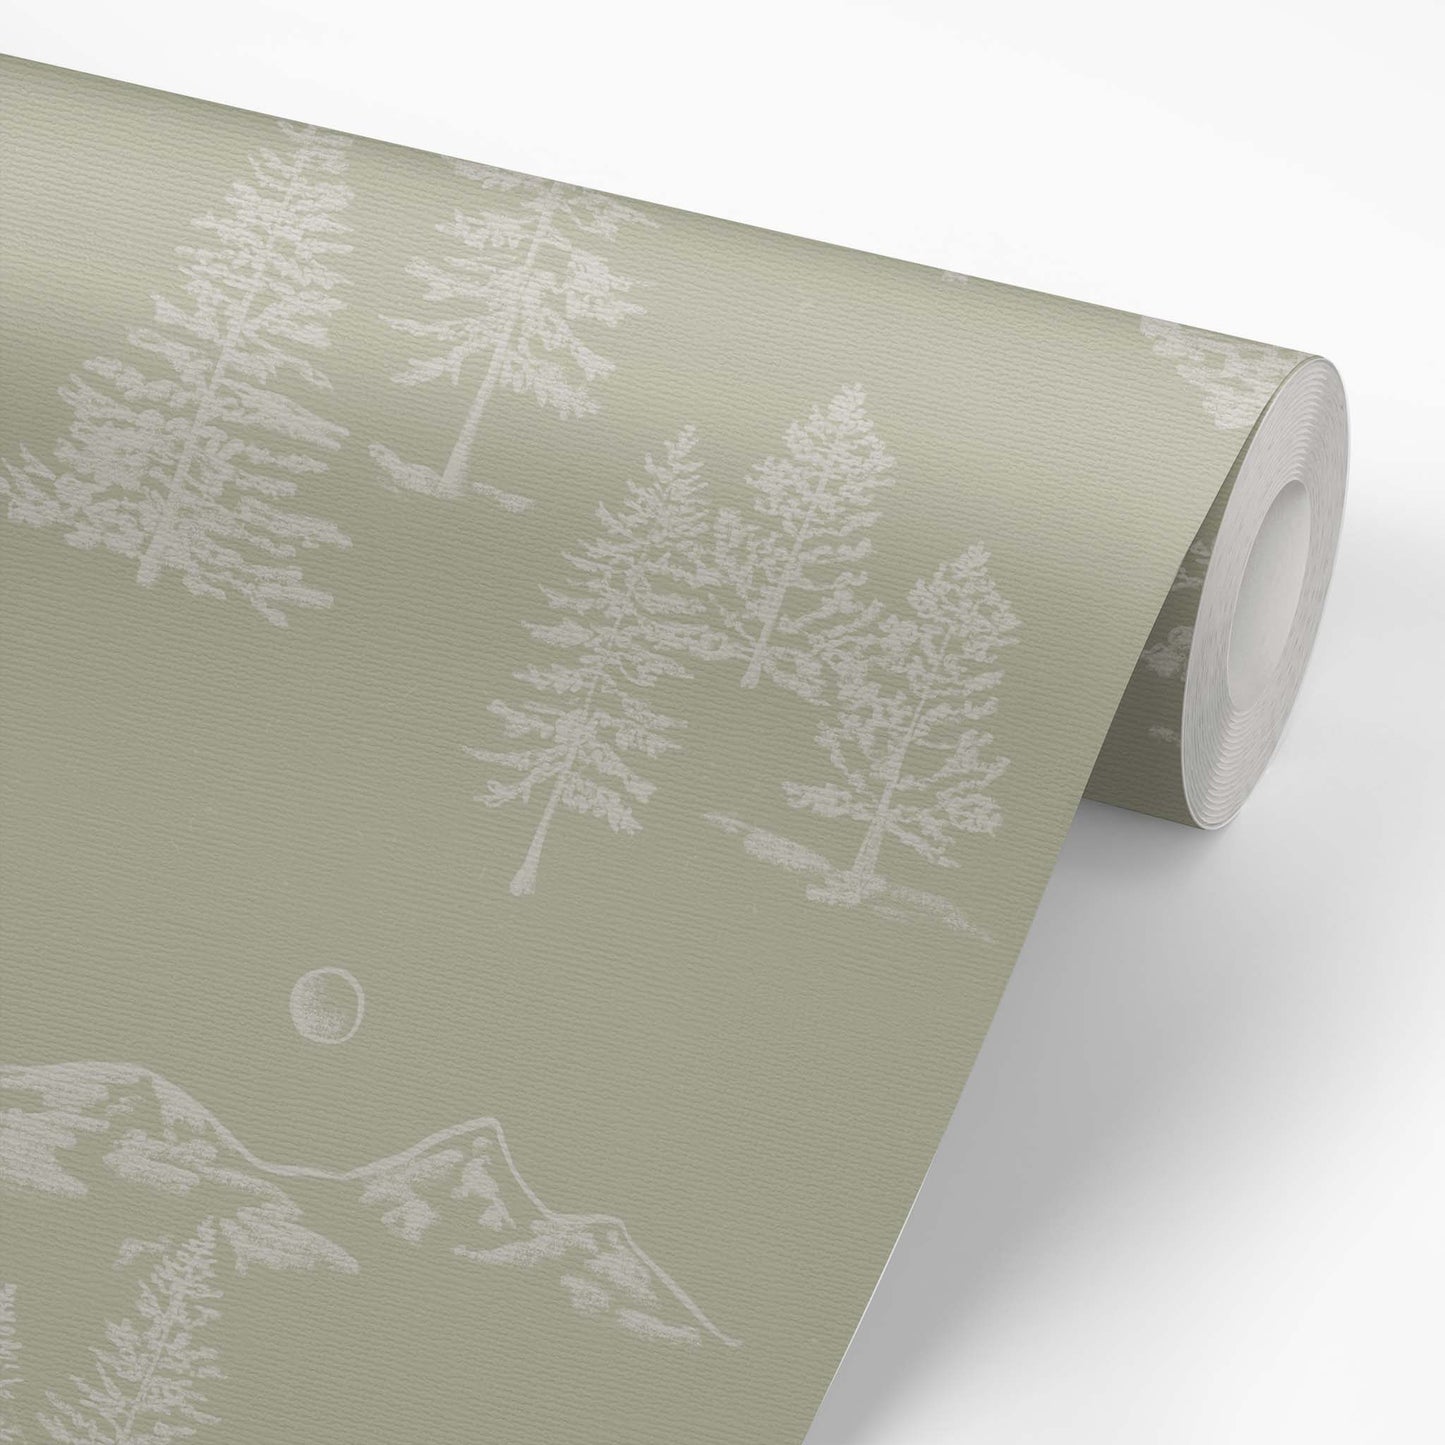 This wallpaper roll shows our Mountain Green Wallpaper in Light Green. This peel and stick, removable wallpaper was designed by artist Mariah Cottrell and features beautifully sketched mountains and trees.